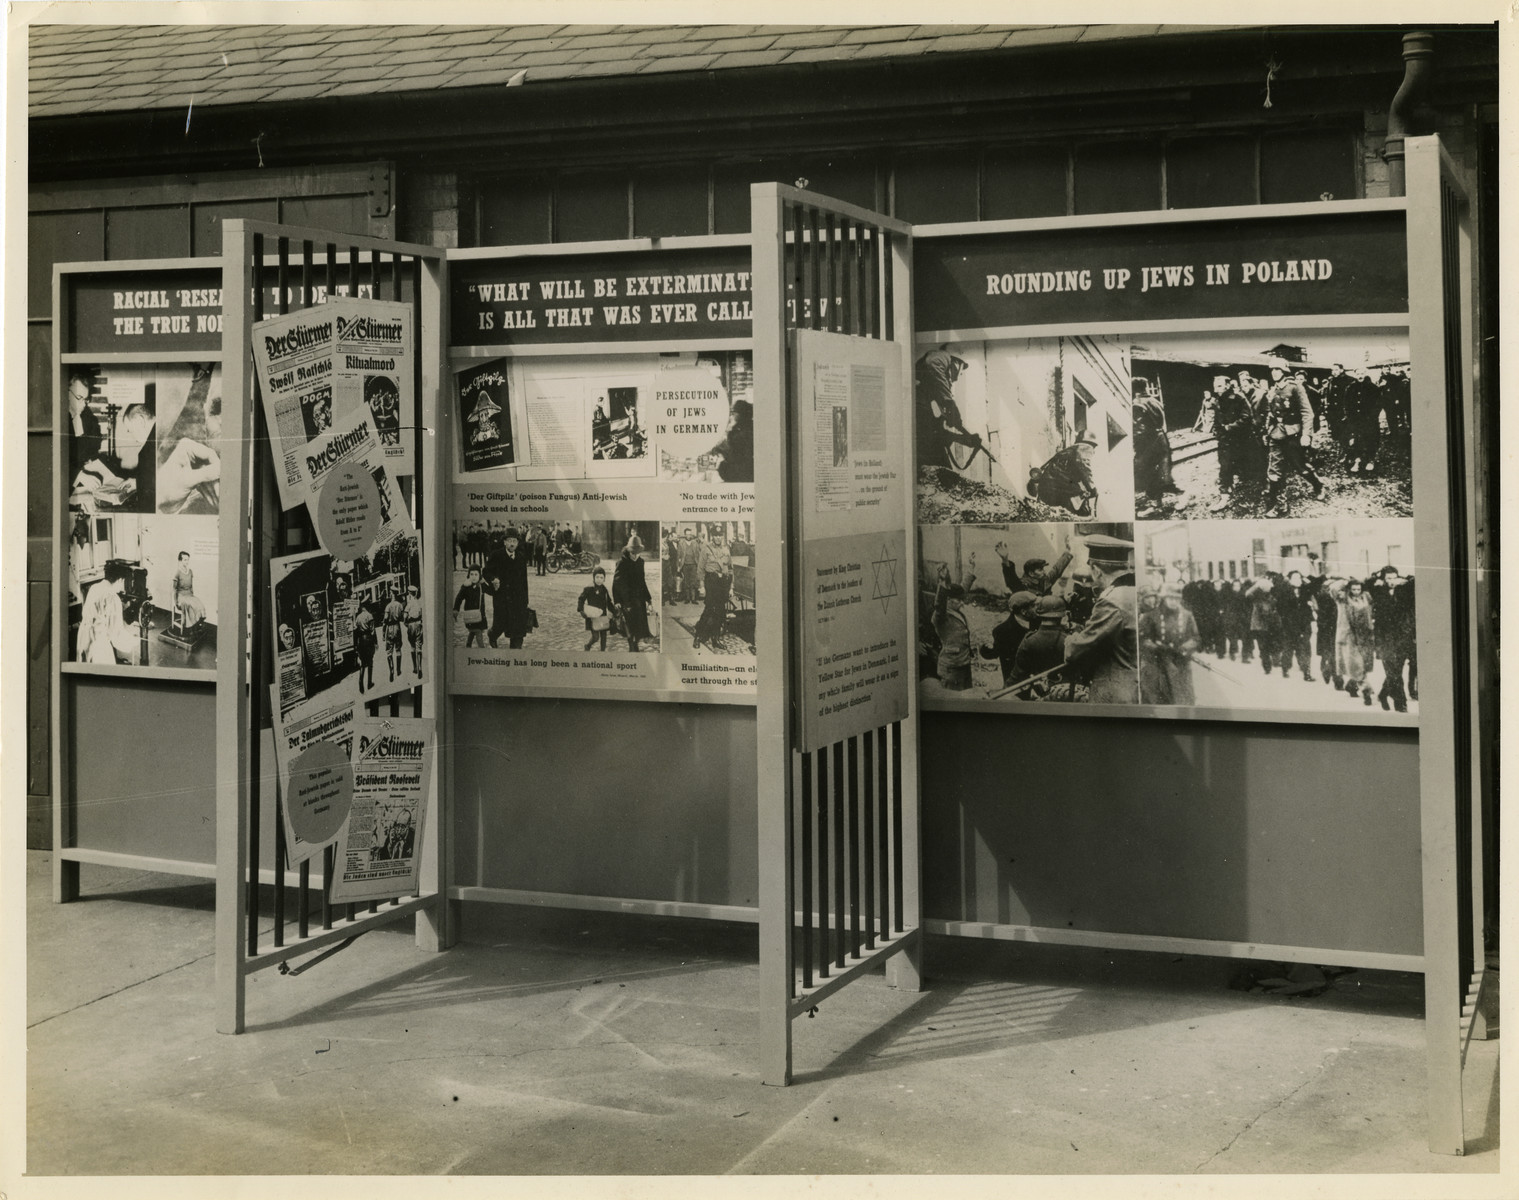 Panel from a 1944 exhibition in London, England, enaltd 